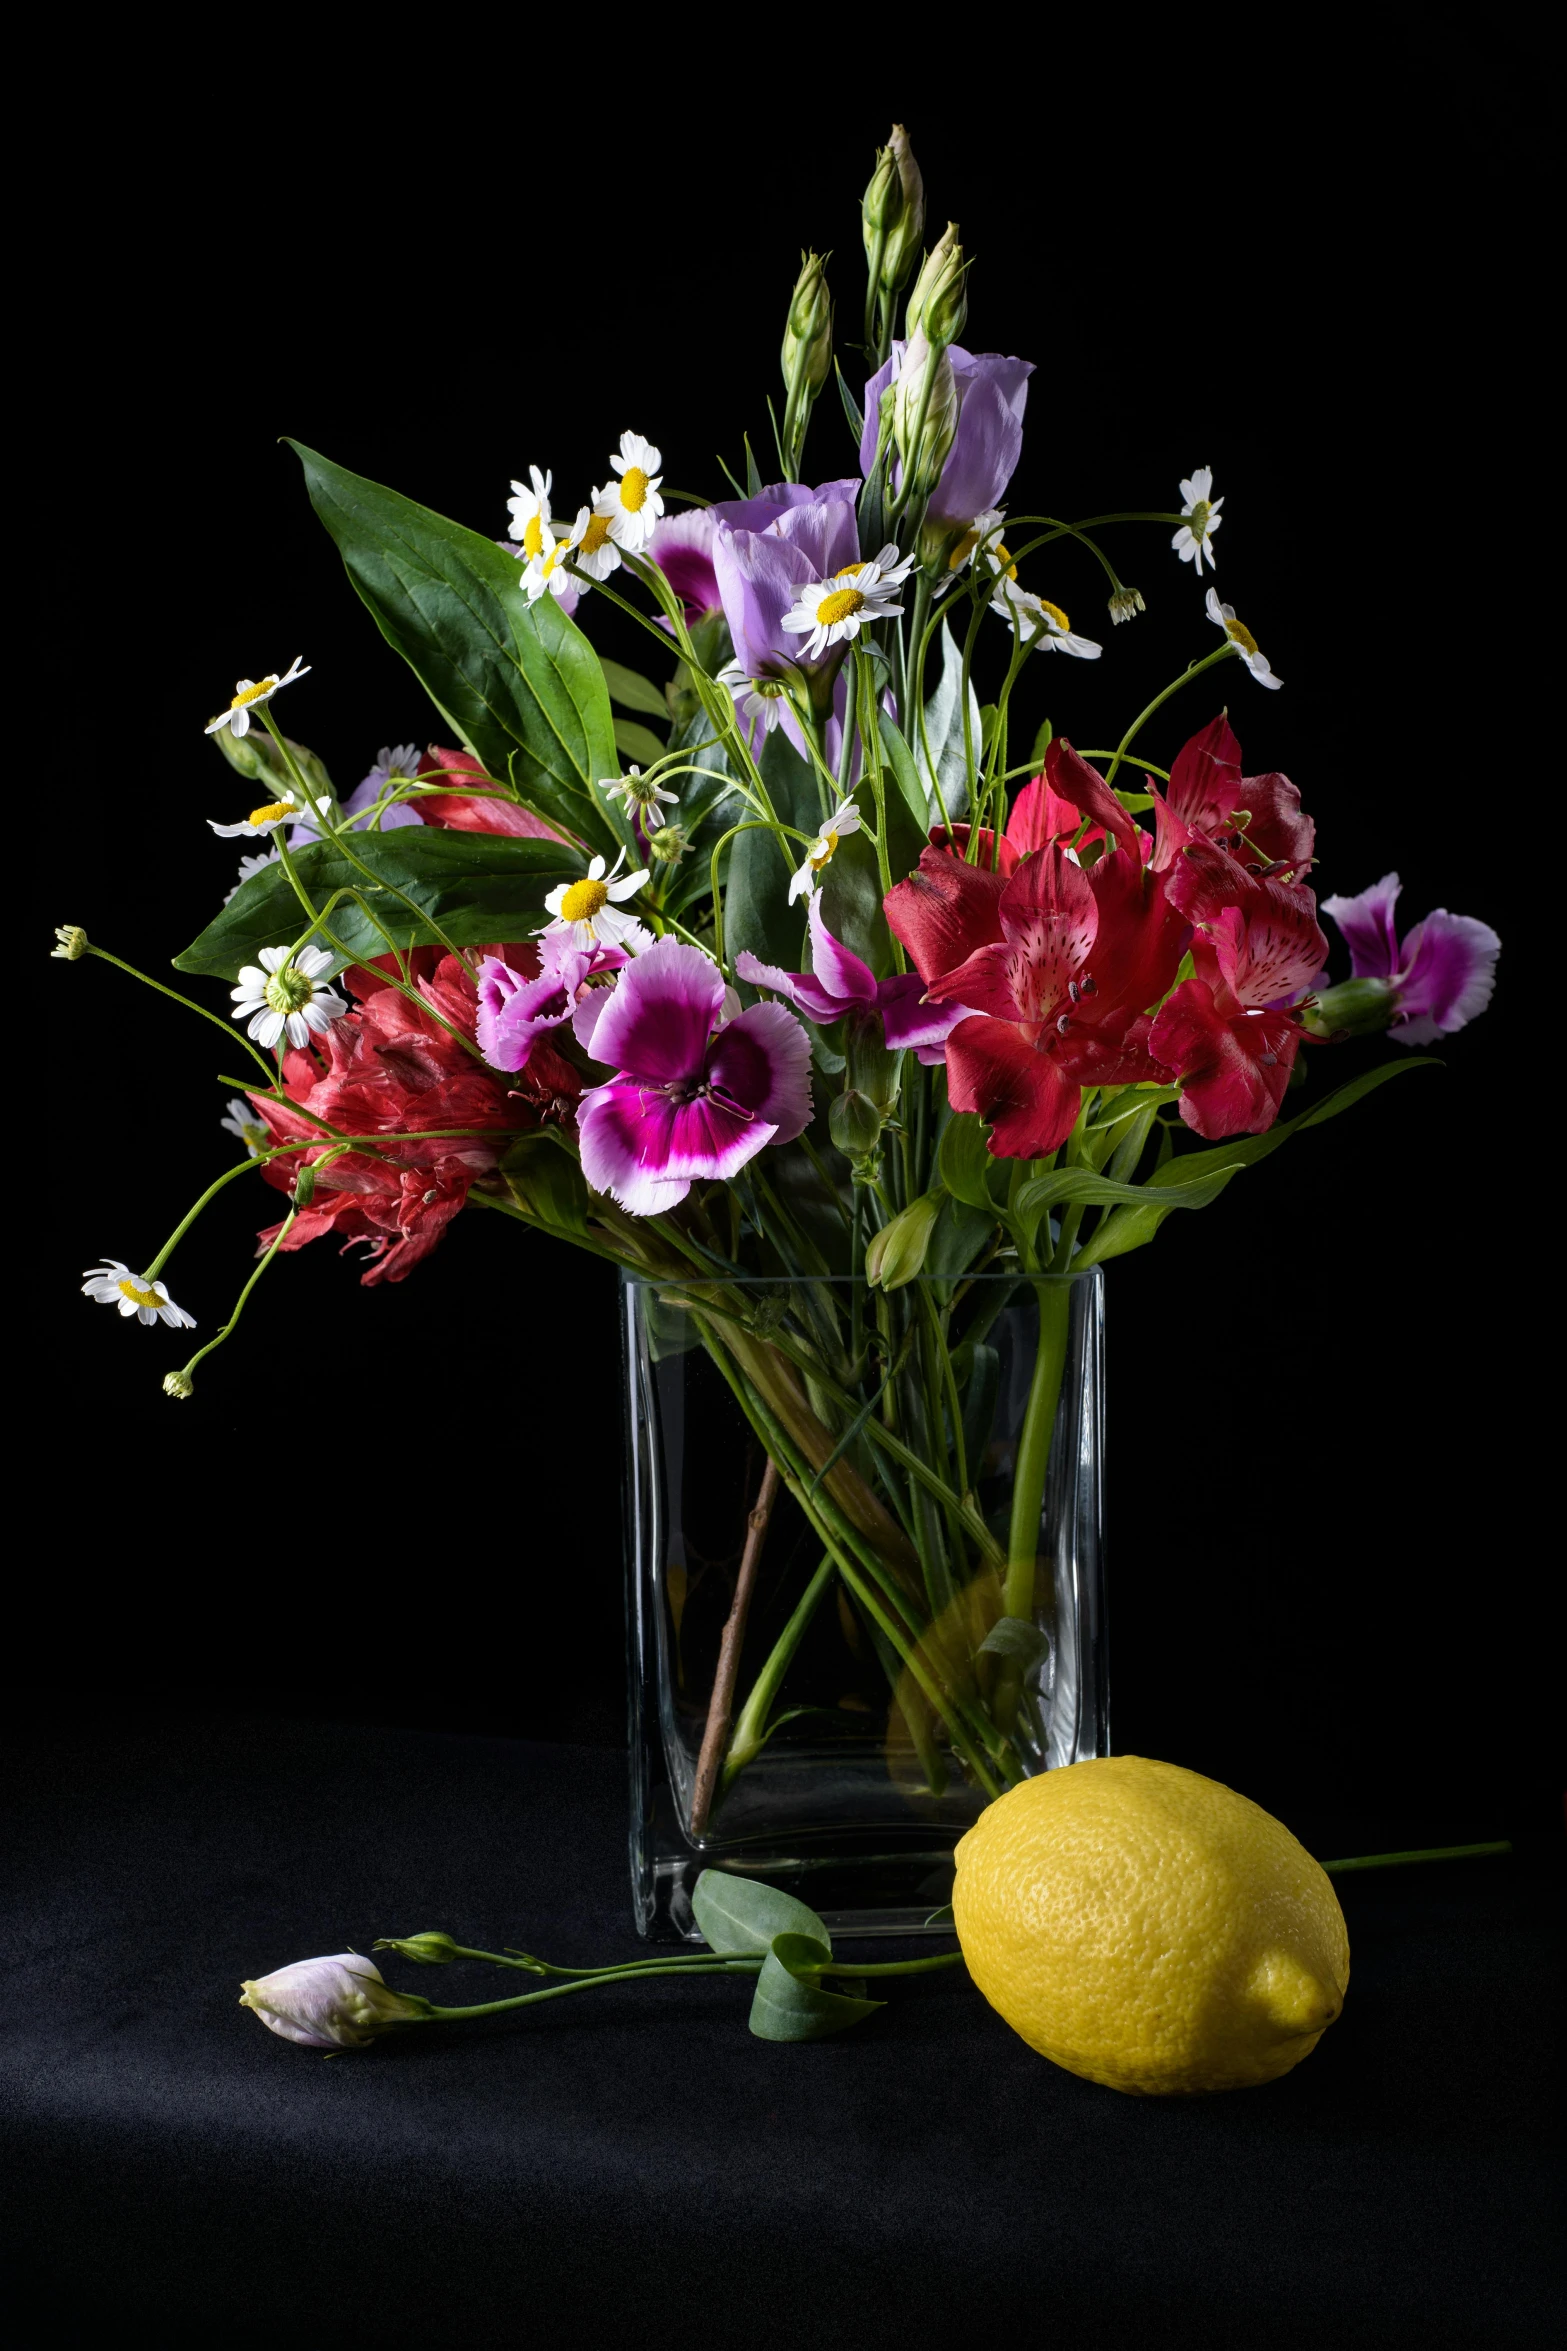 a vase filled with flowers next to a lemon, inspired by François Boquet, shutterstock contest winner, with a black background, full color photograph, edible flowers, purple and red flowers